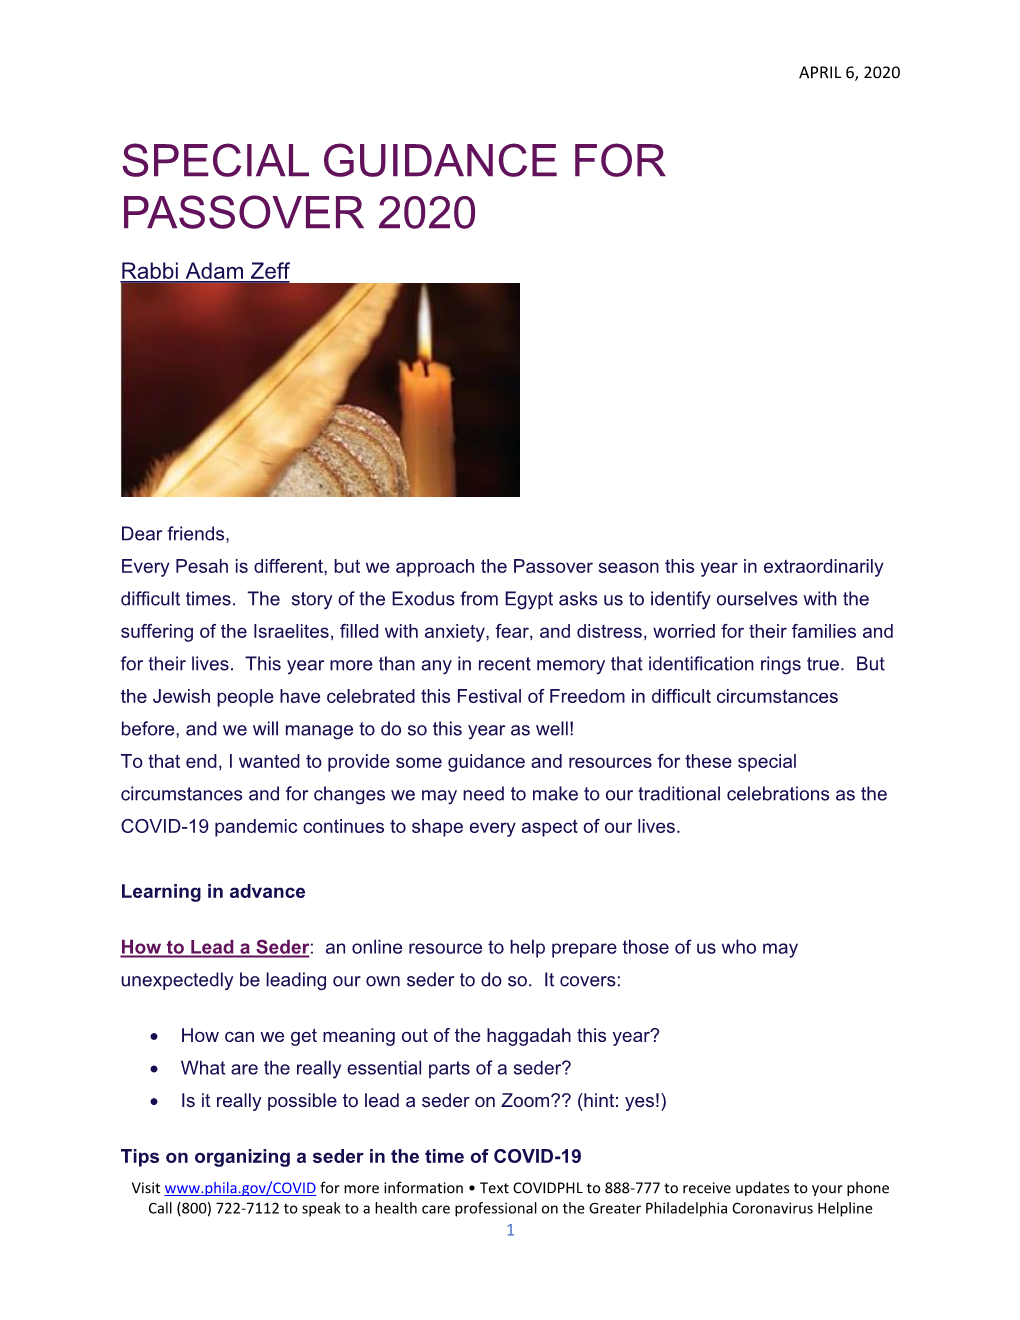 Special Guidance for Passover 2020